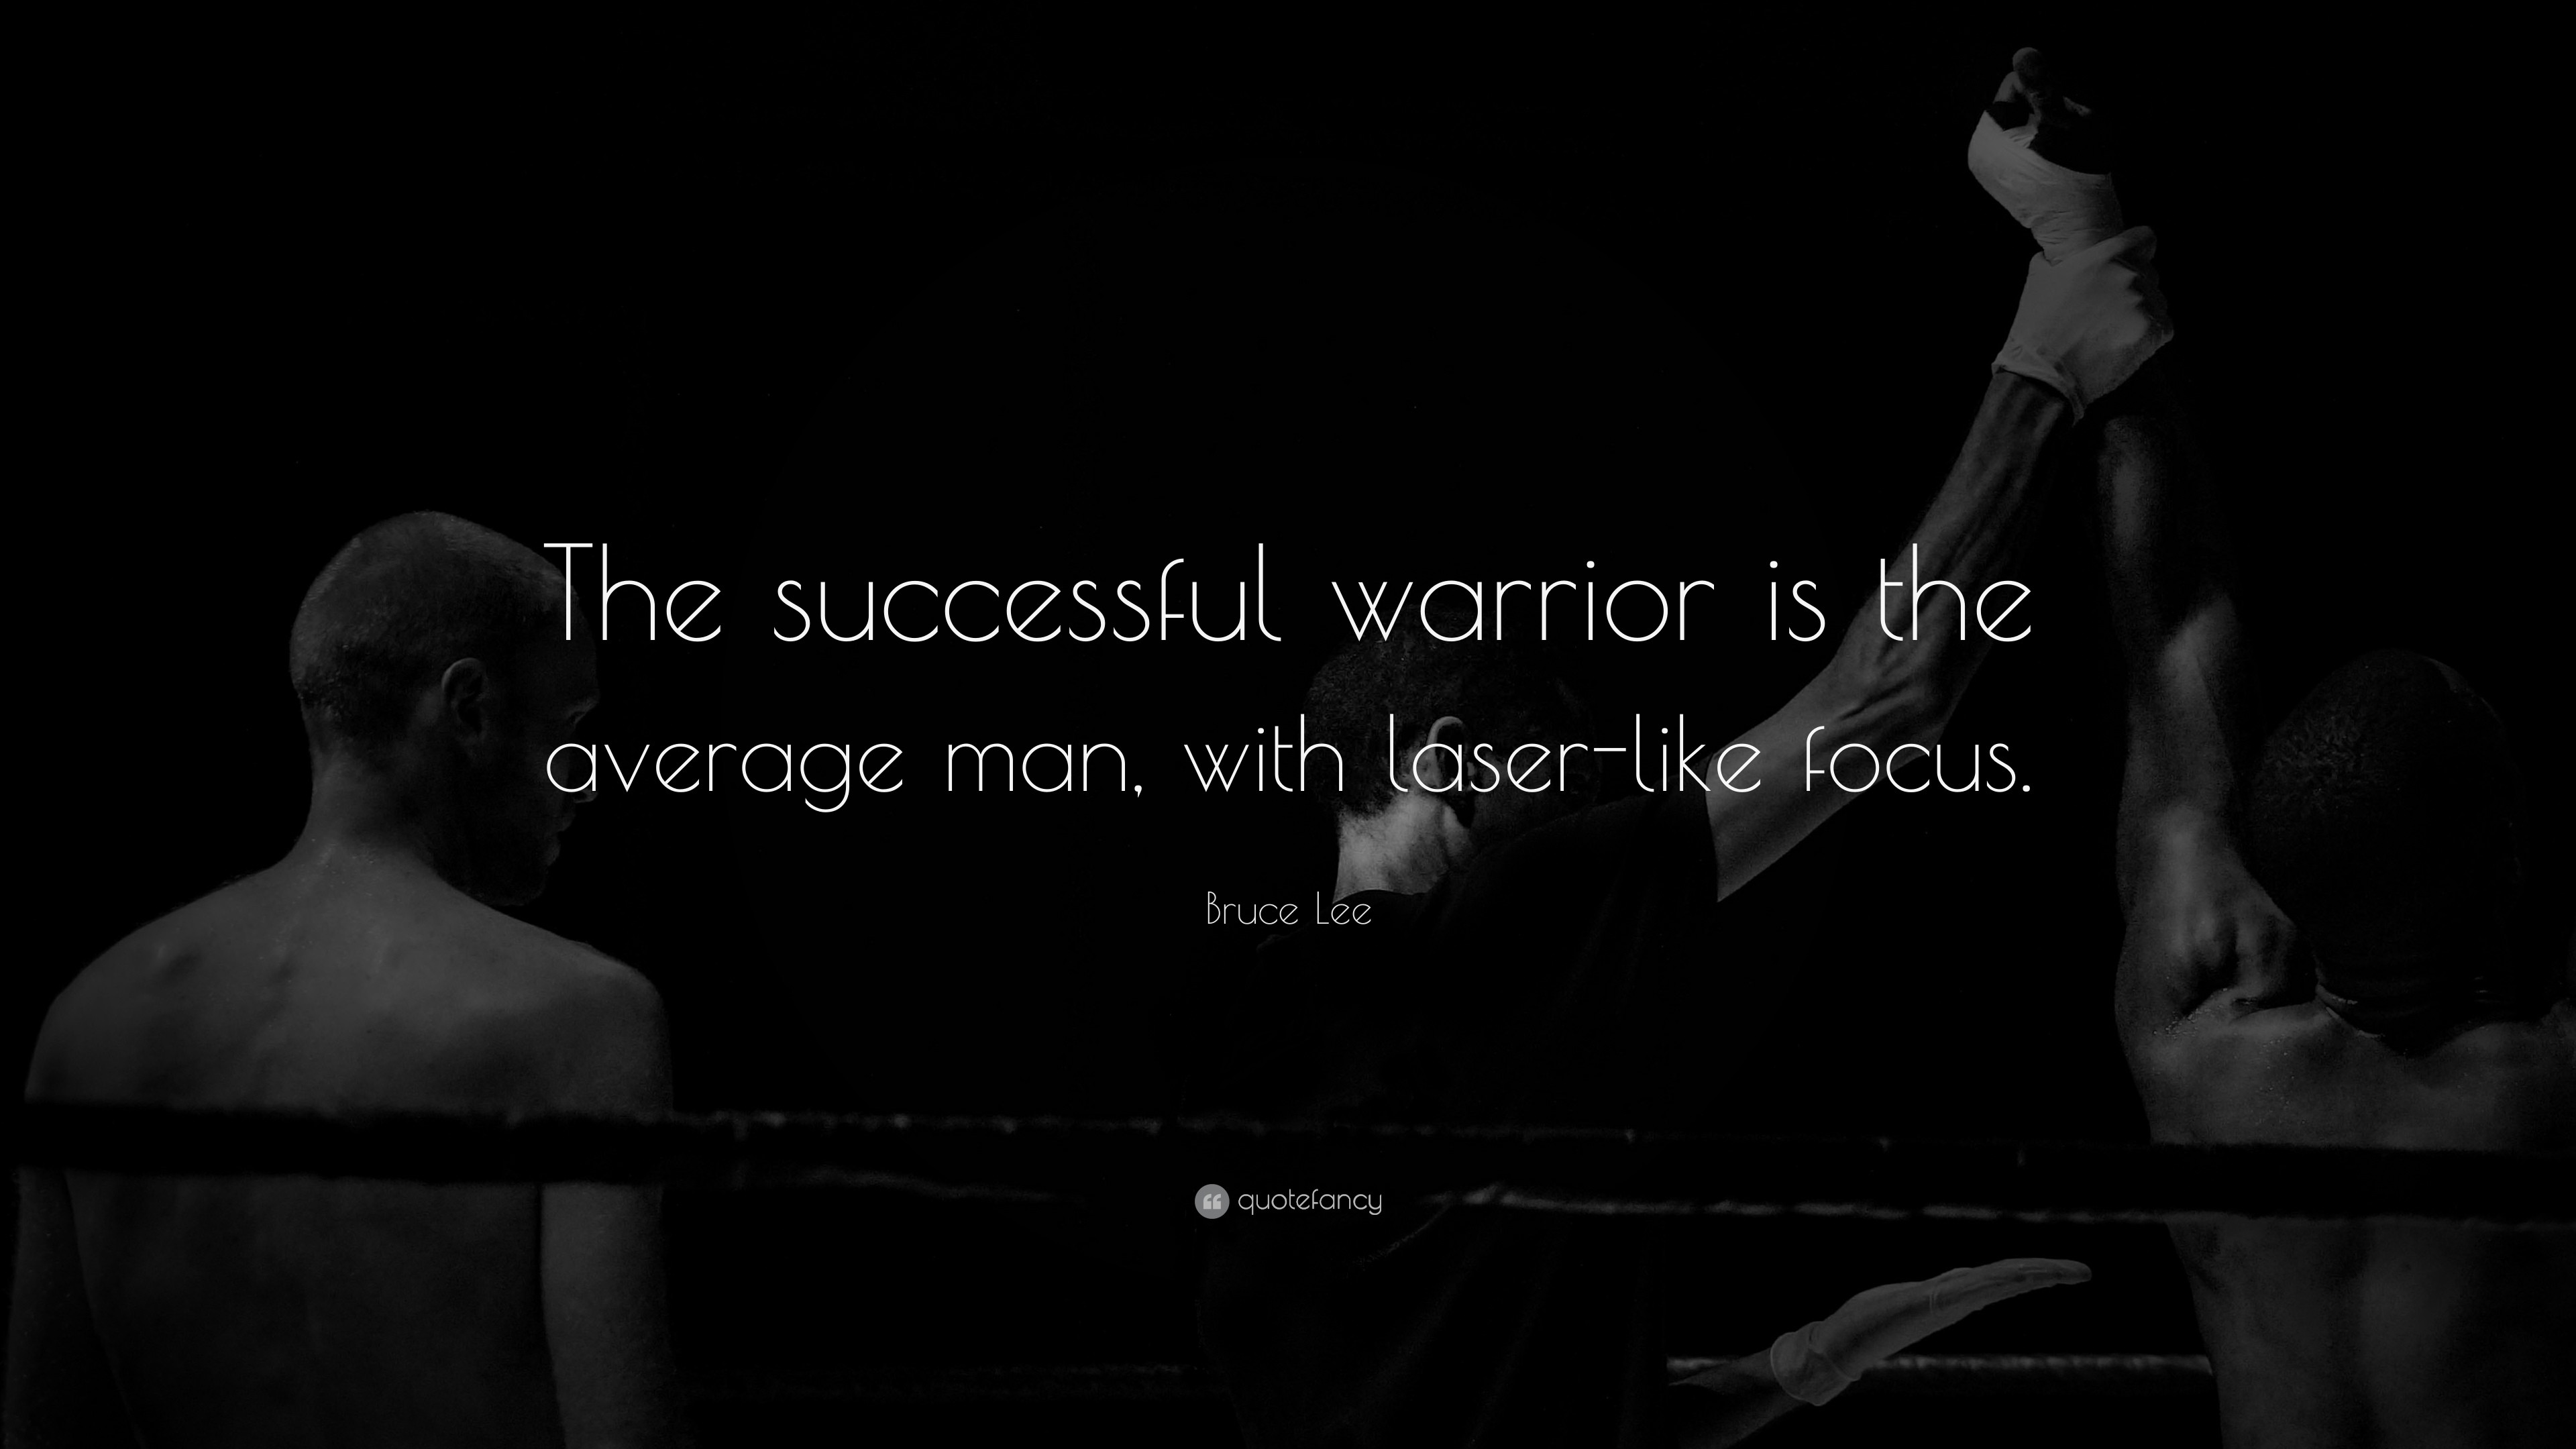 3840x2160 Success Quotes: “The successful warrior is the average man, with laser-like